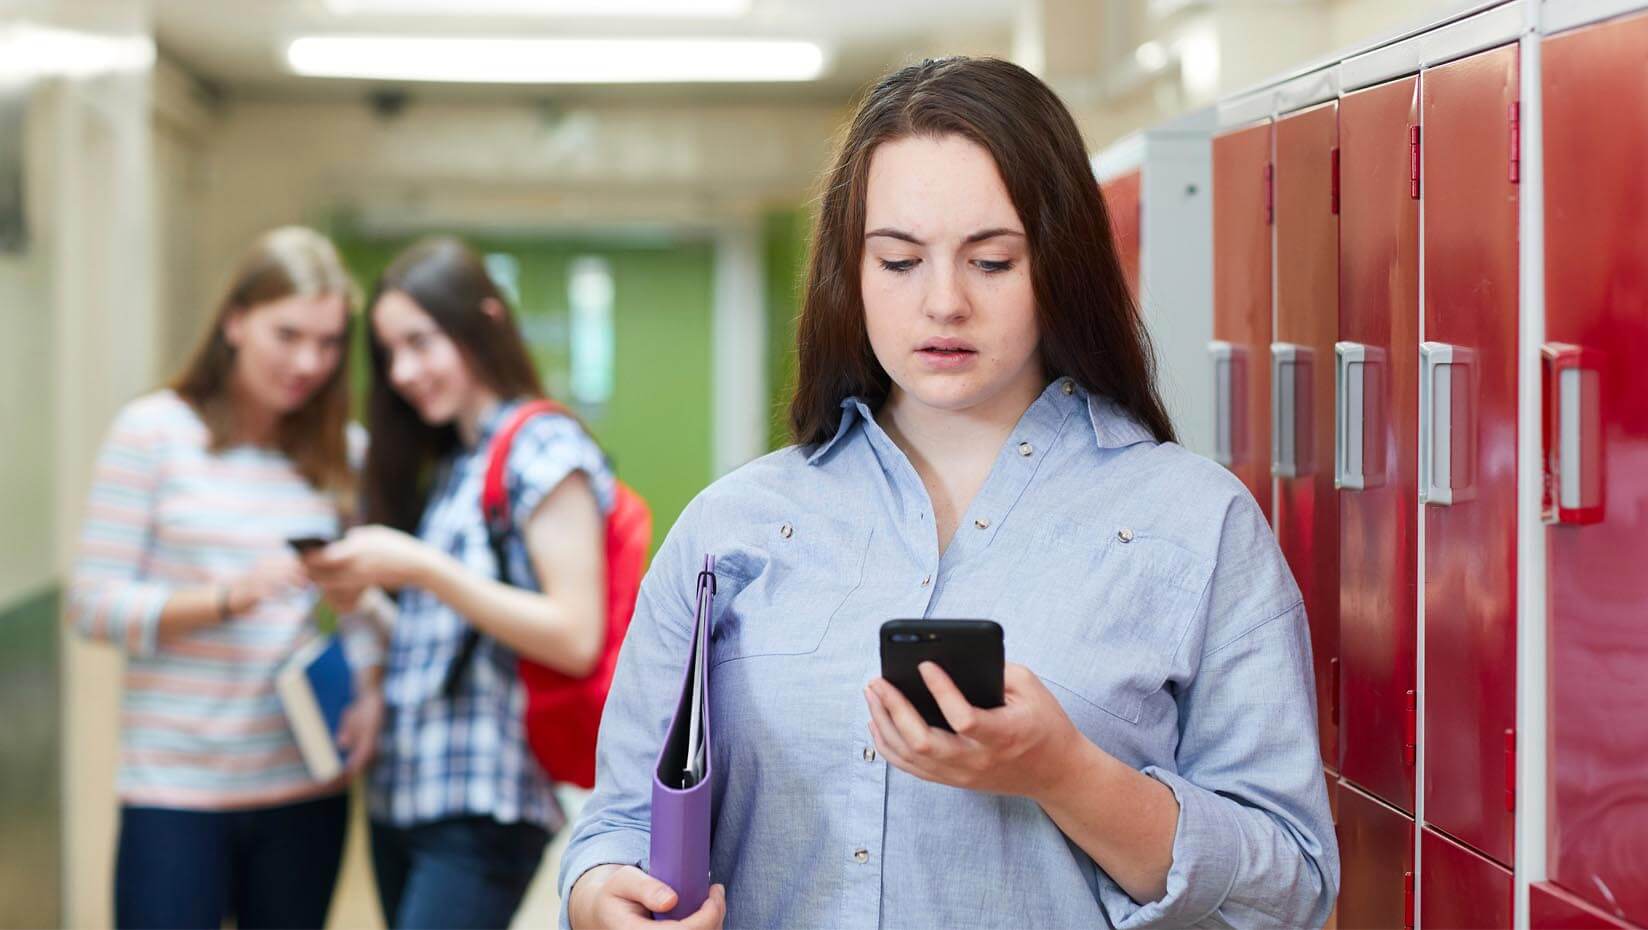 A photo showing two people cyberbullying a third person in a school hallway lined with lockers